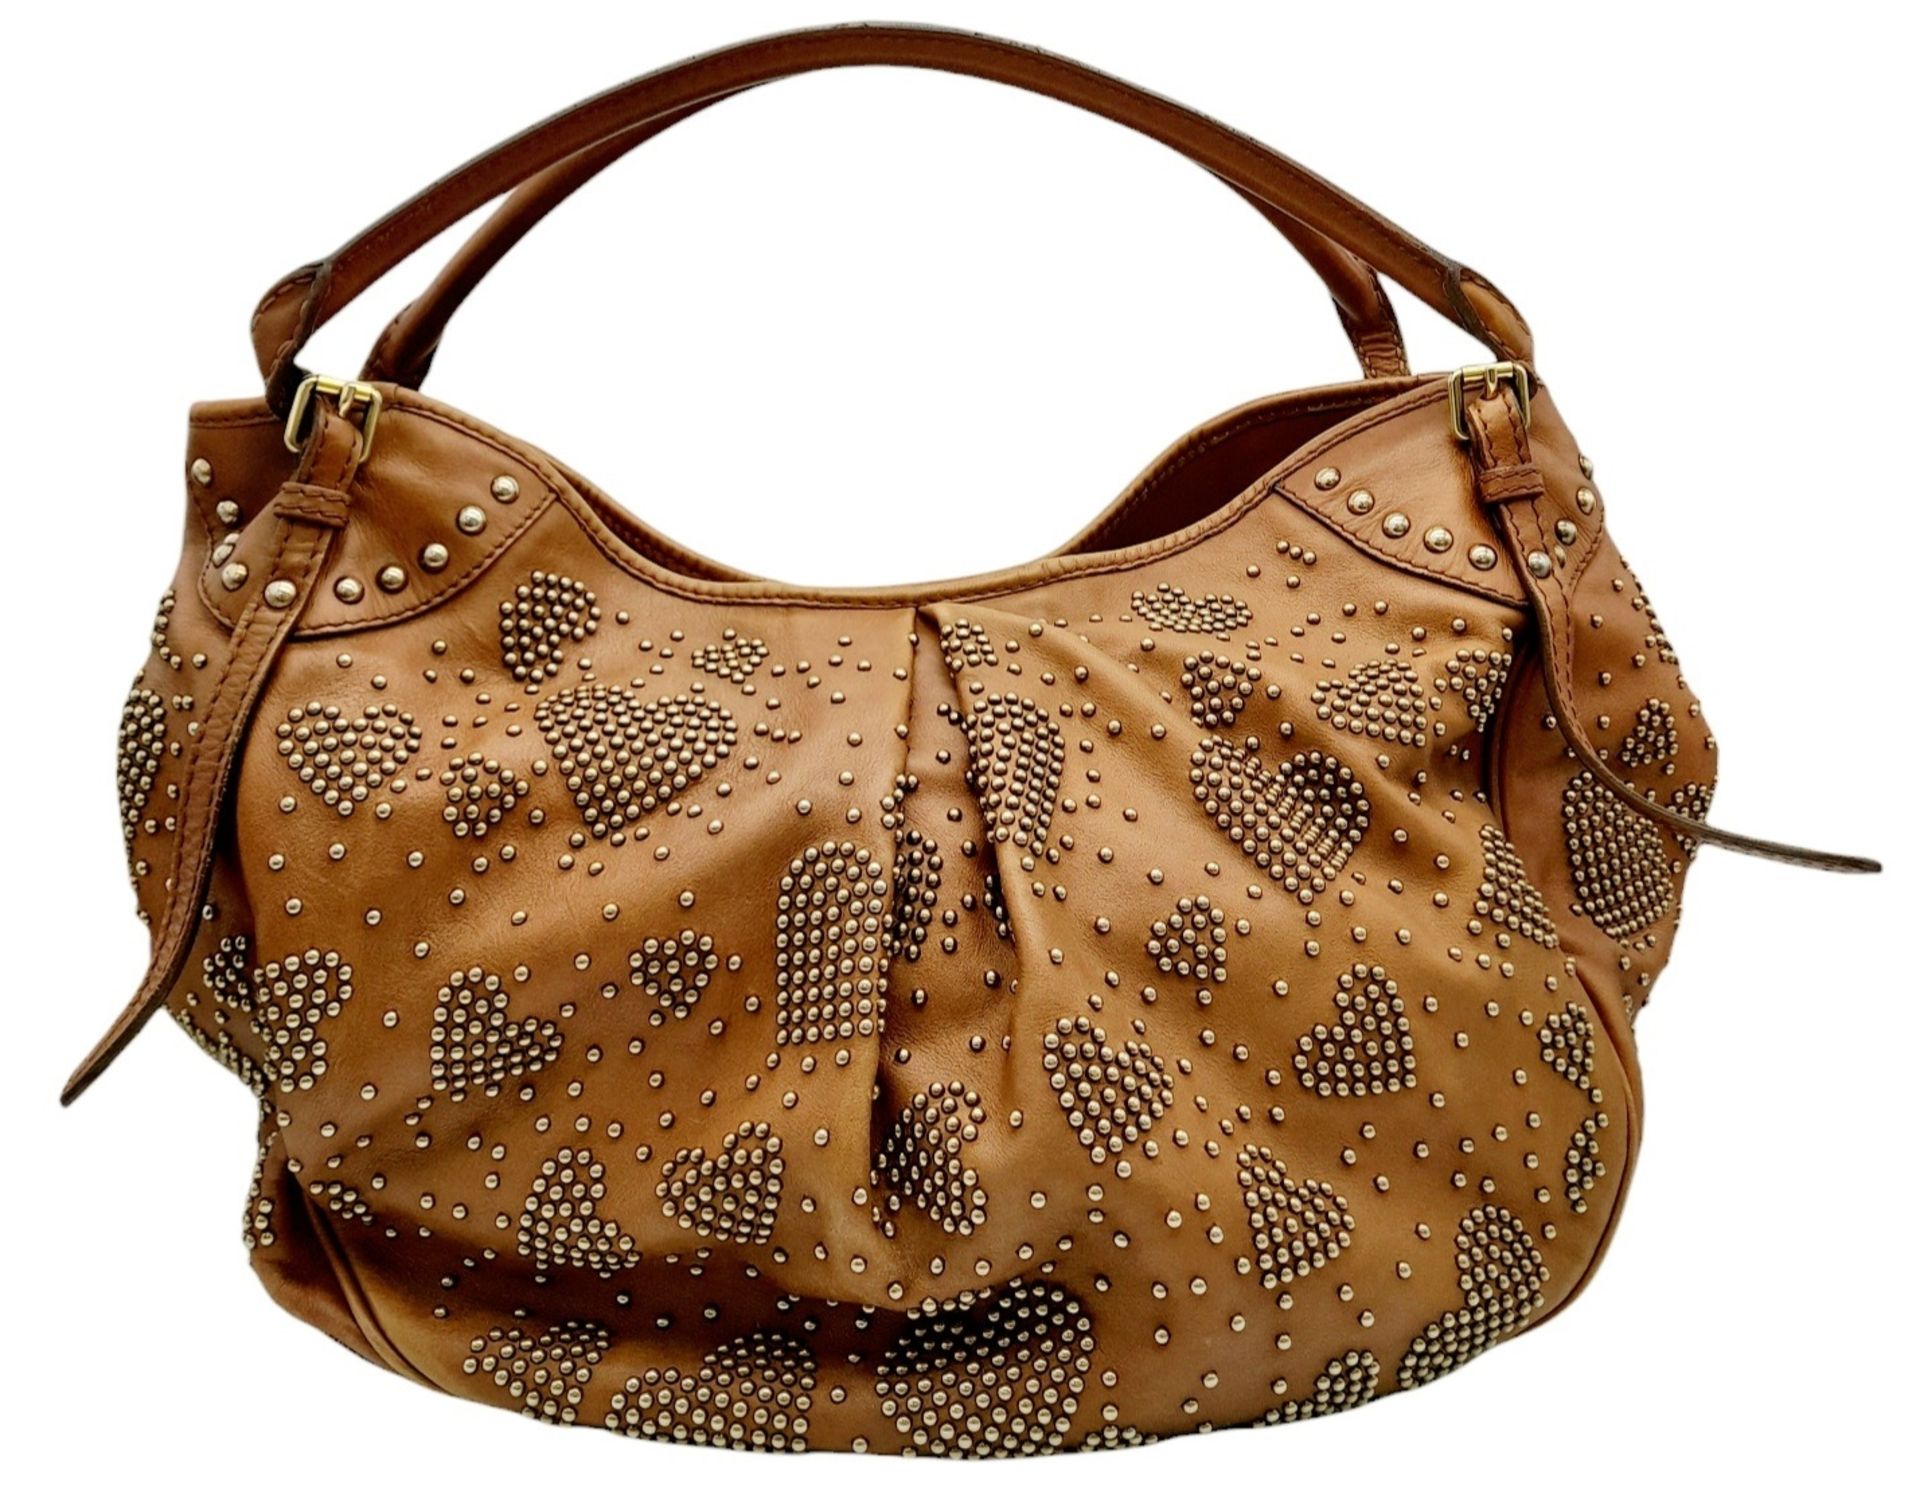 A Burberry Tan Studded Heart Hobo Bag. Leather exterior with stud embellishments, golden-toned - Image 2 of 8